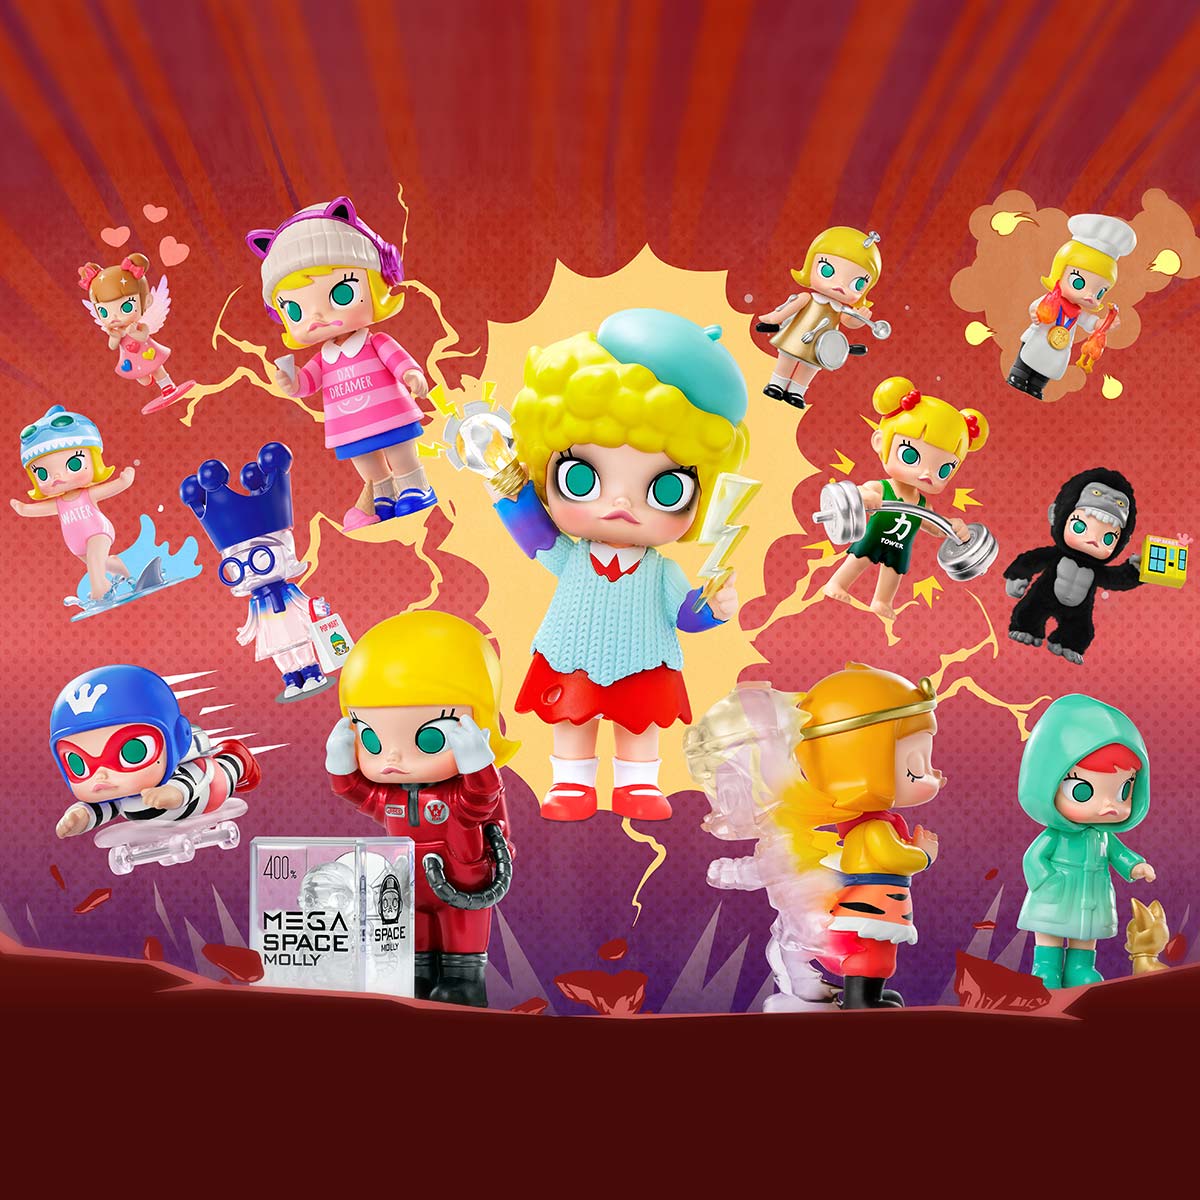 【New】Pop Mart: MOLLY My Instant Superpower Series Figures